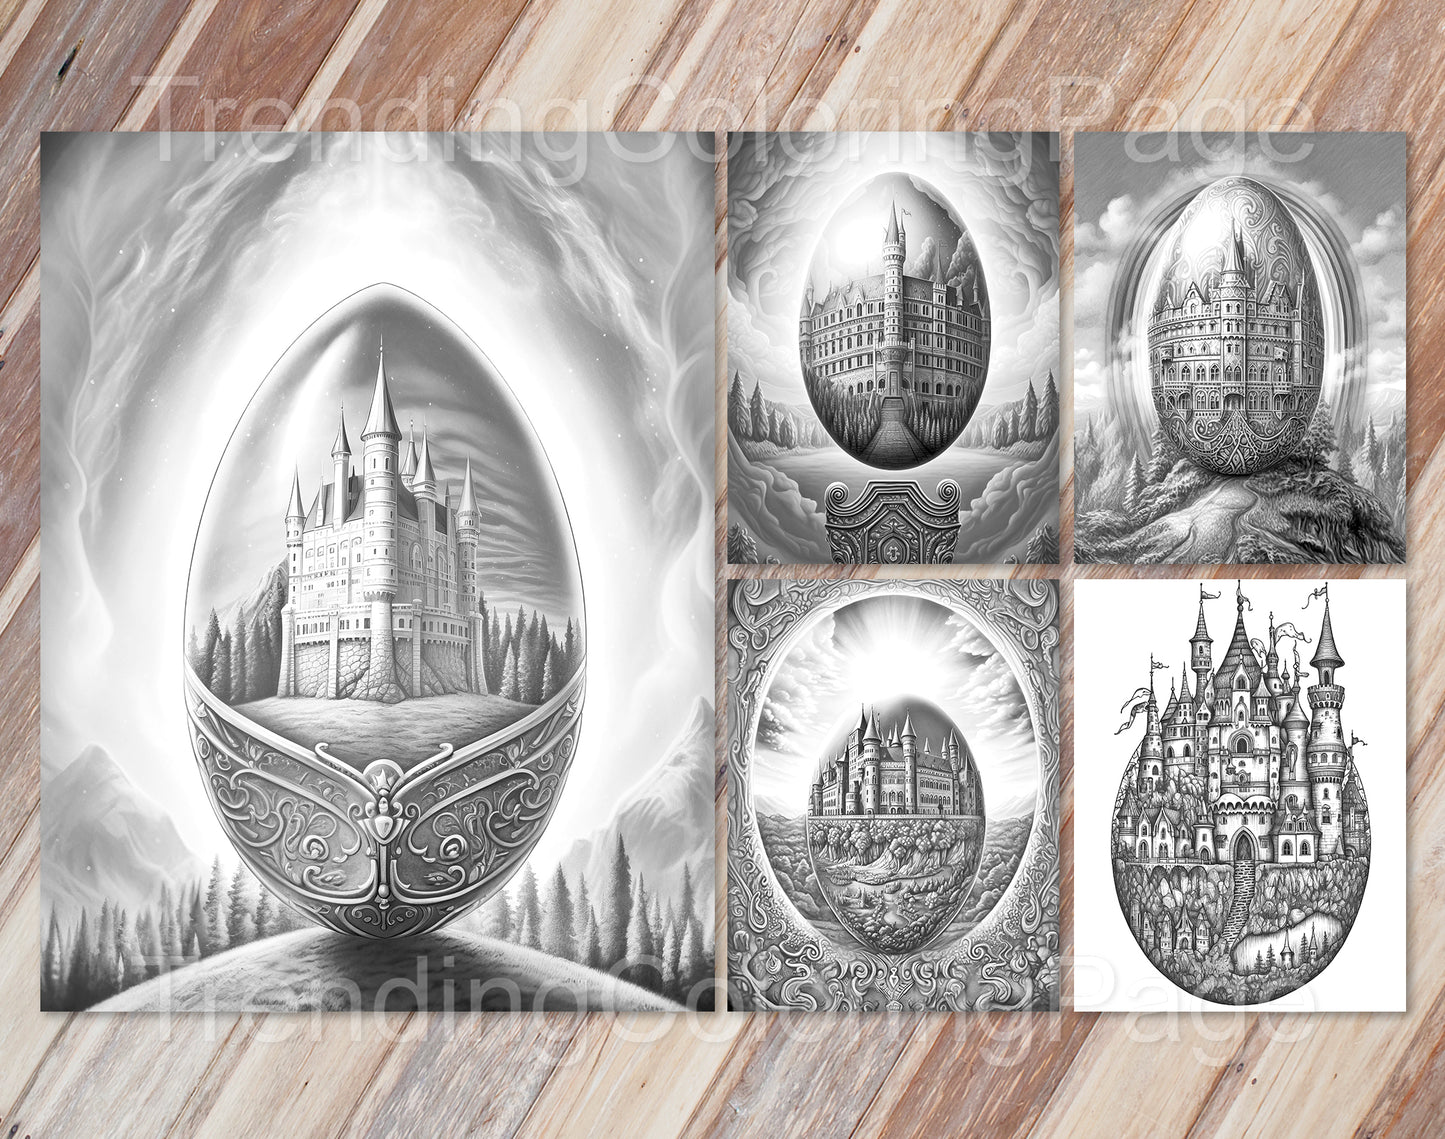 35 Easter Egg Dreamland Grayscale Coloring Pages - Instant Download - Printable PDF Dark/Light